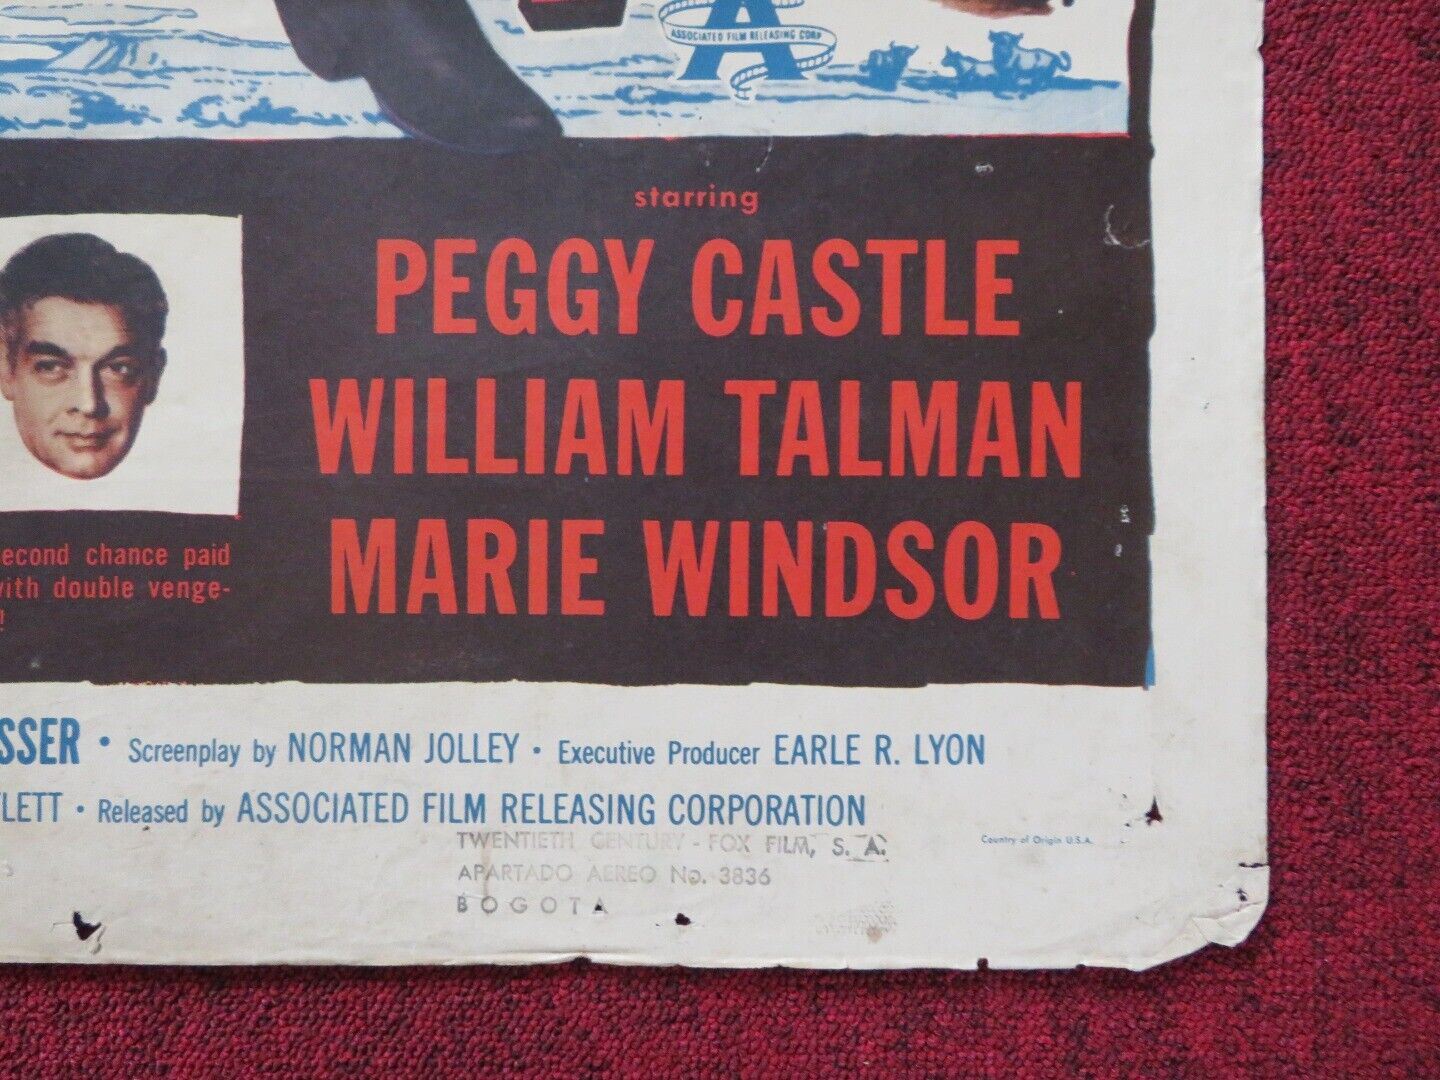 TWO-GUN LADY FOLDED US ONE SHEET POSTER PEGGY CASTLE WILLIAM TALMAN 1955